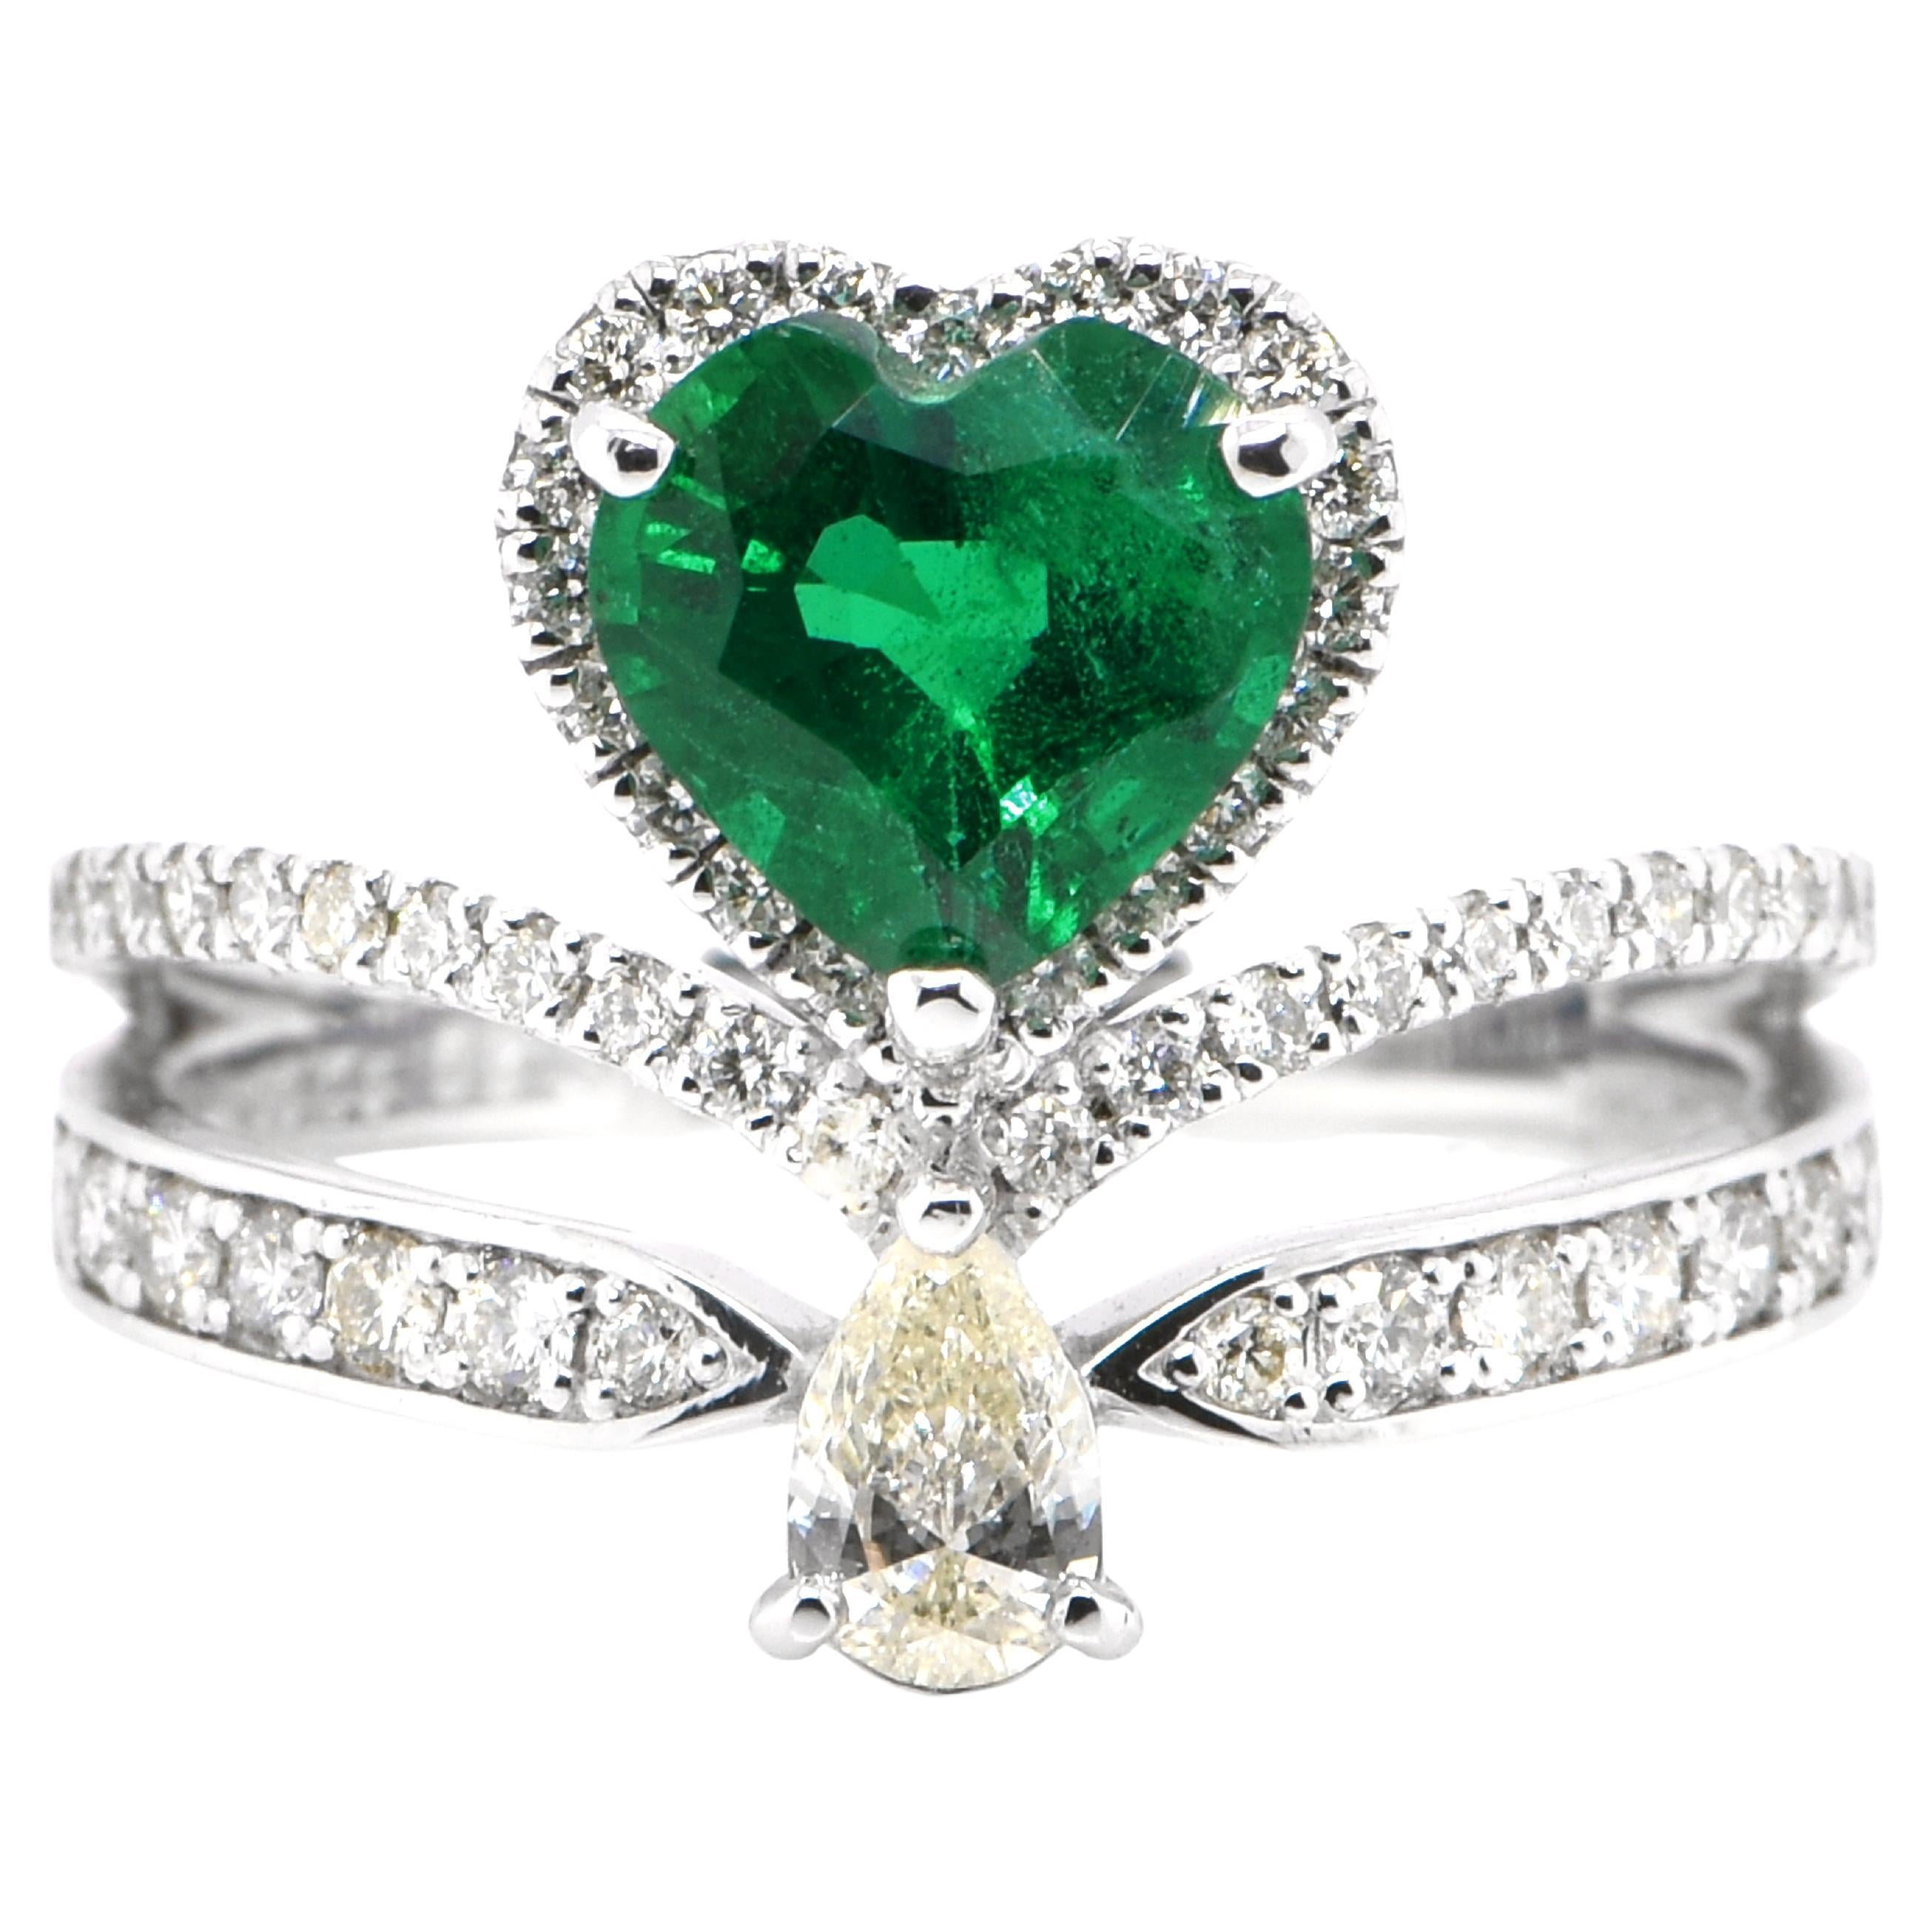 1.20 Carat Heart-Cut, Zambian Emerald and Diamond Crown Ring Set in Platinum For Sale